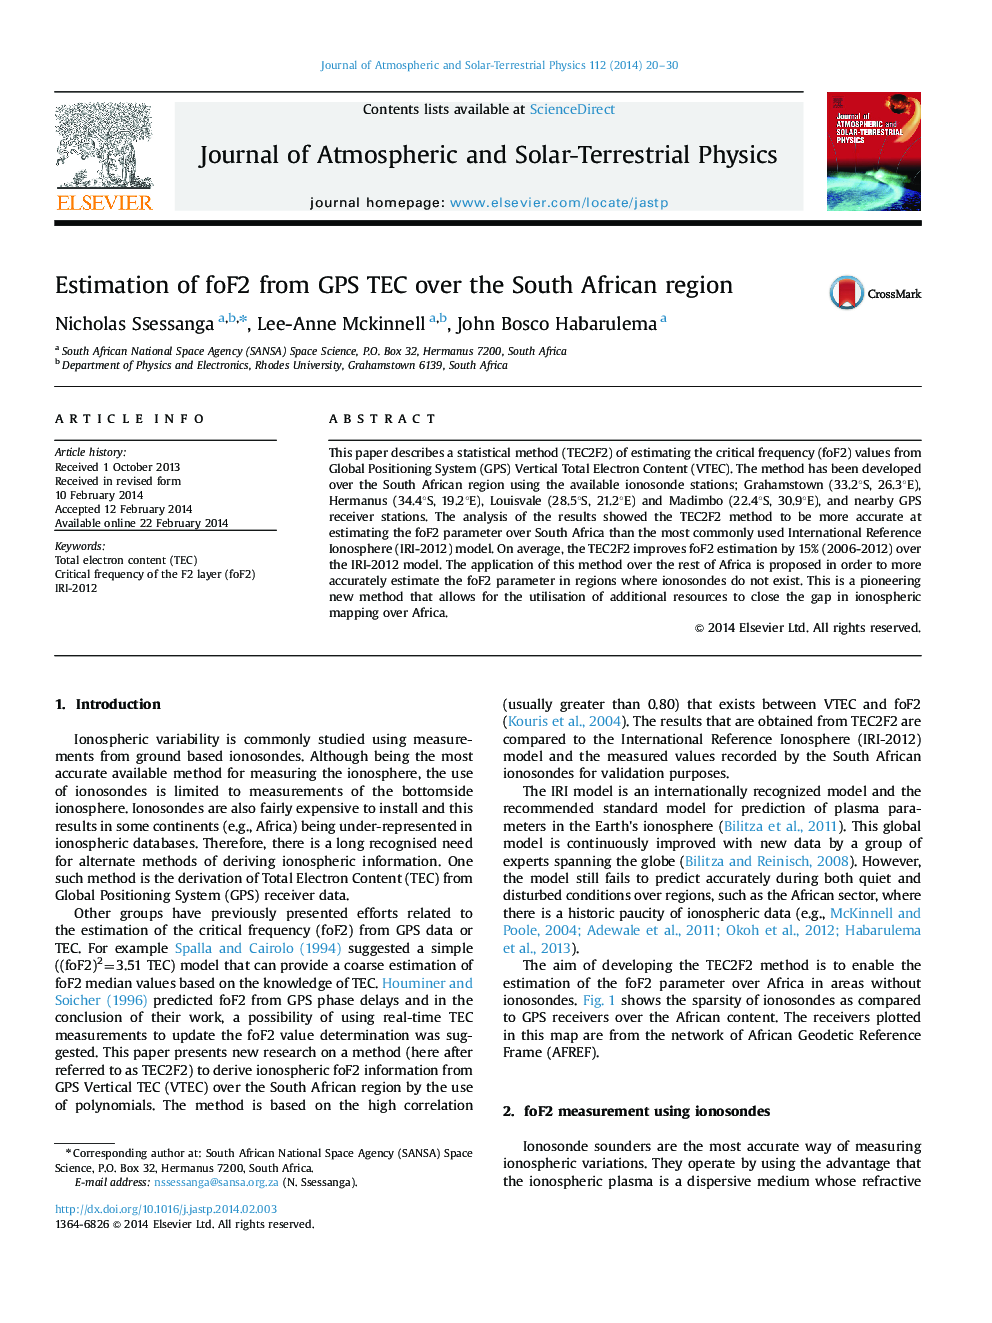 Estimation of foF2 from GPS TEC over the South African region